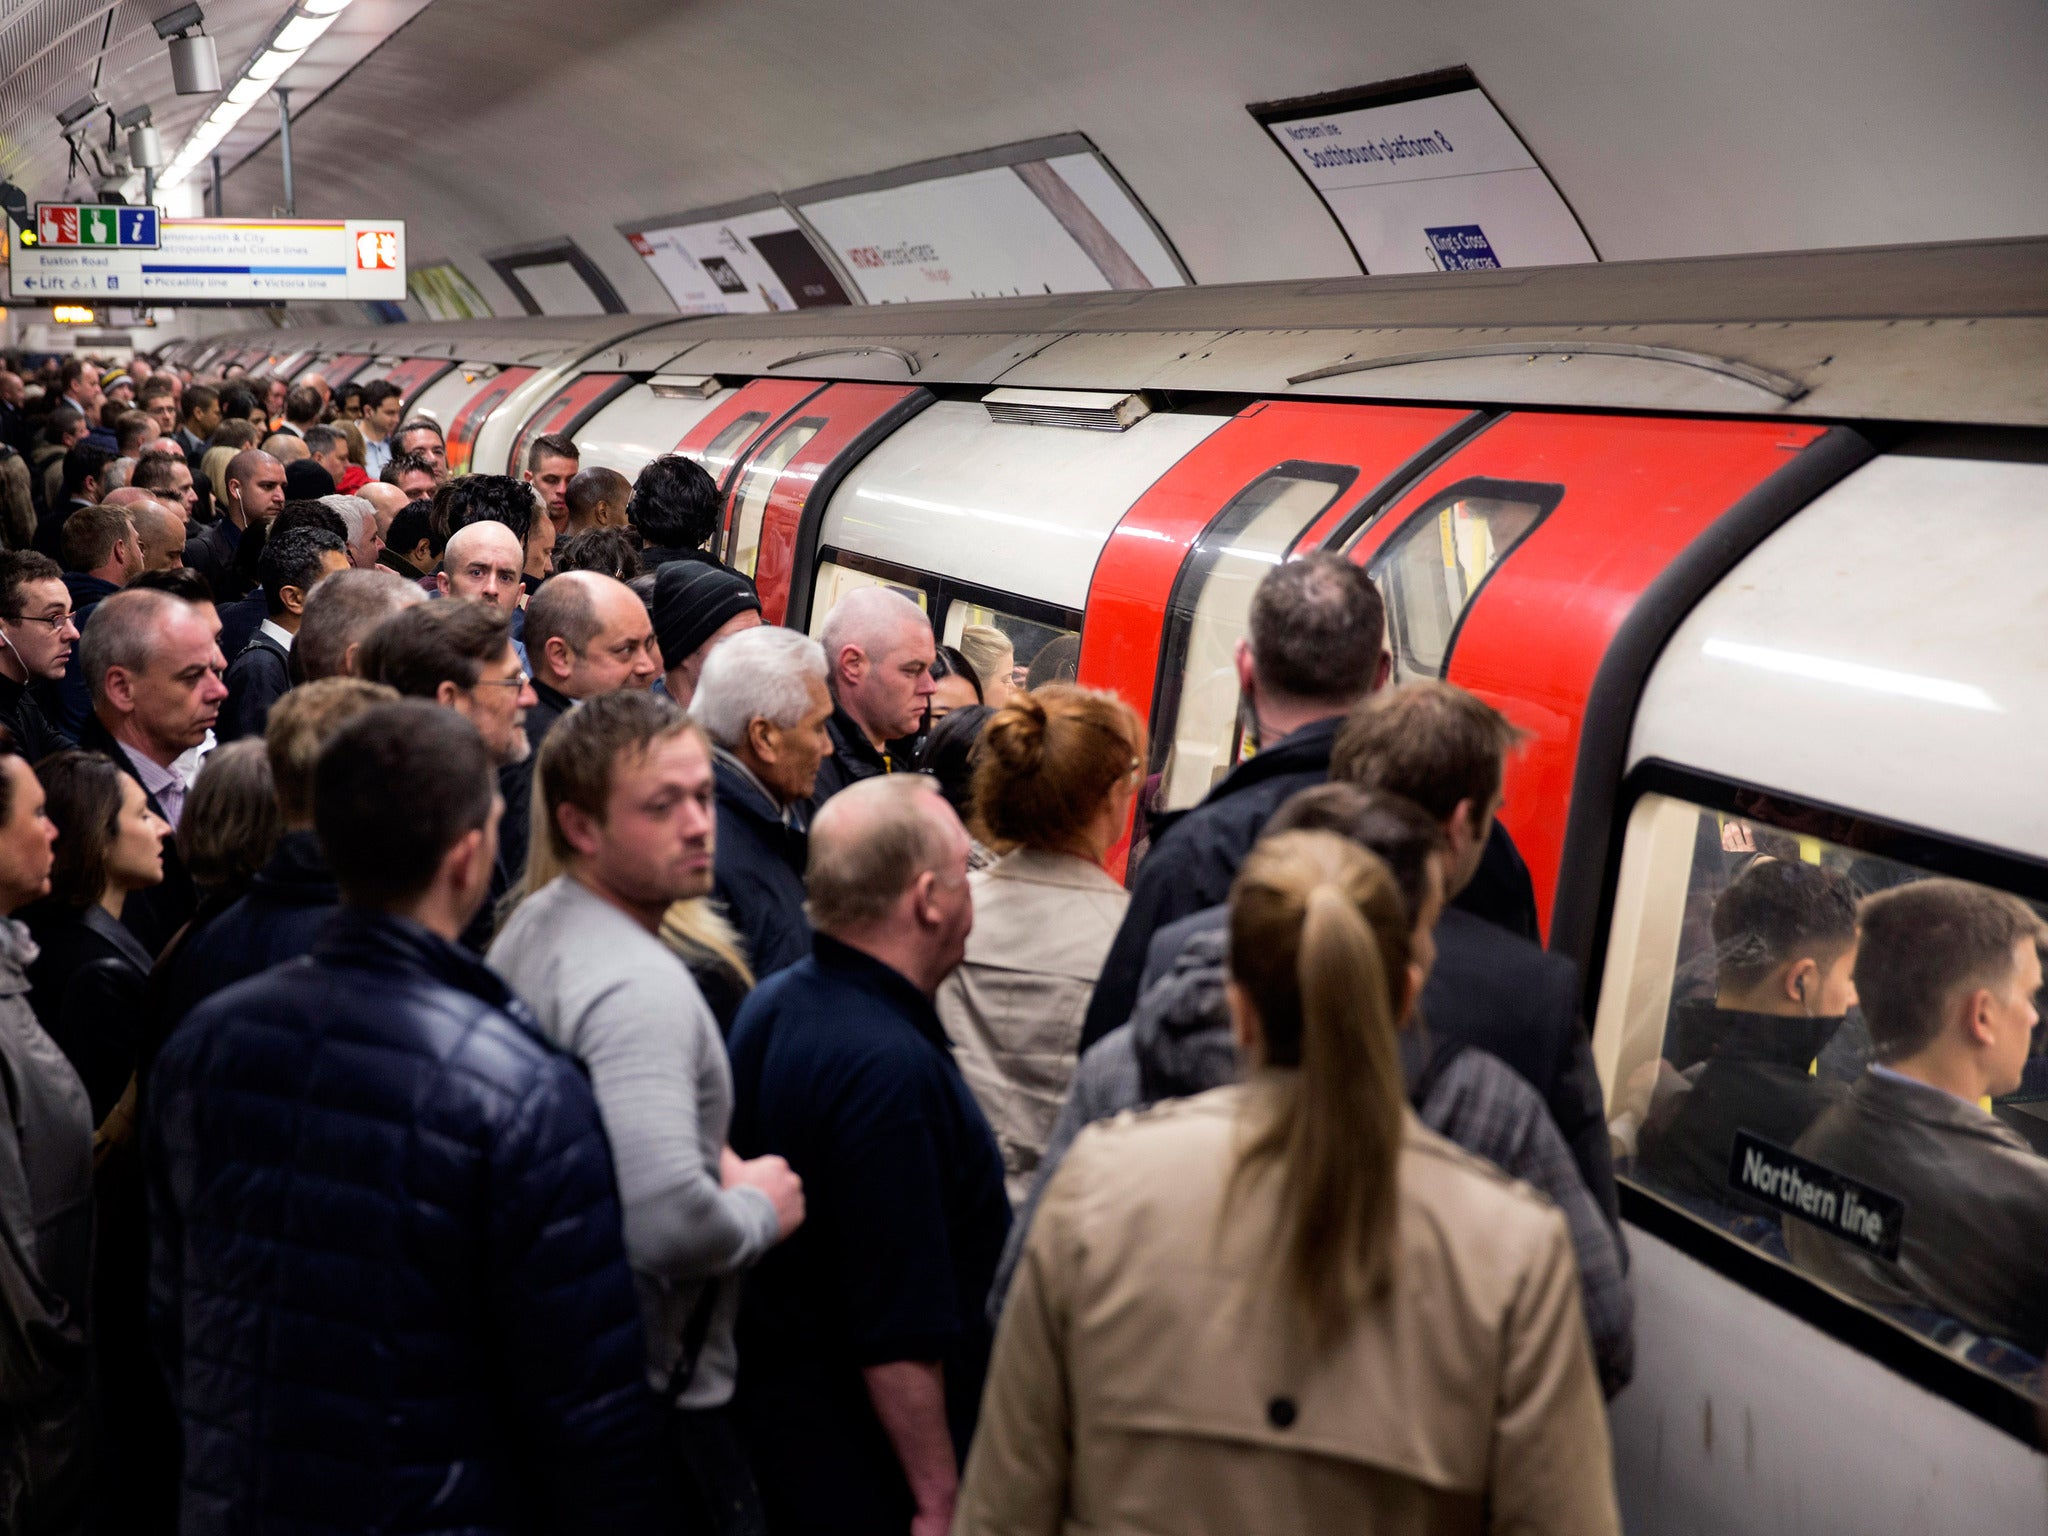 Londoners are wasting 1.9 million hours each month waiting for late Tube trains